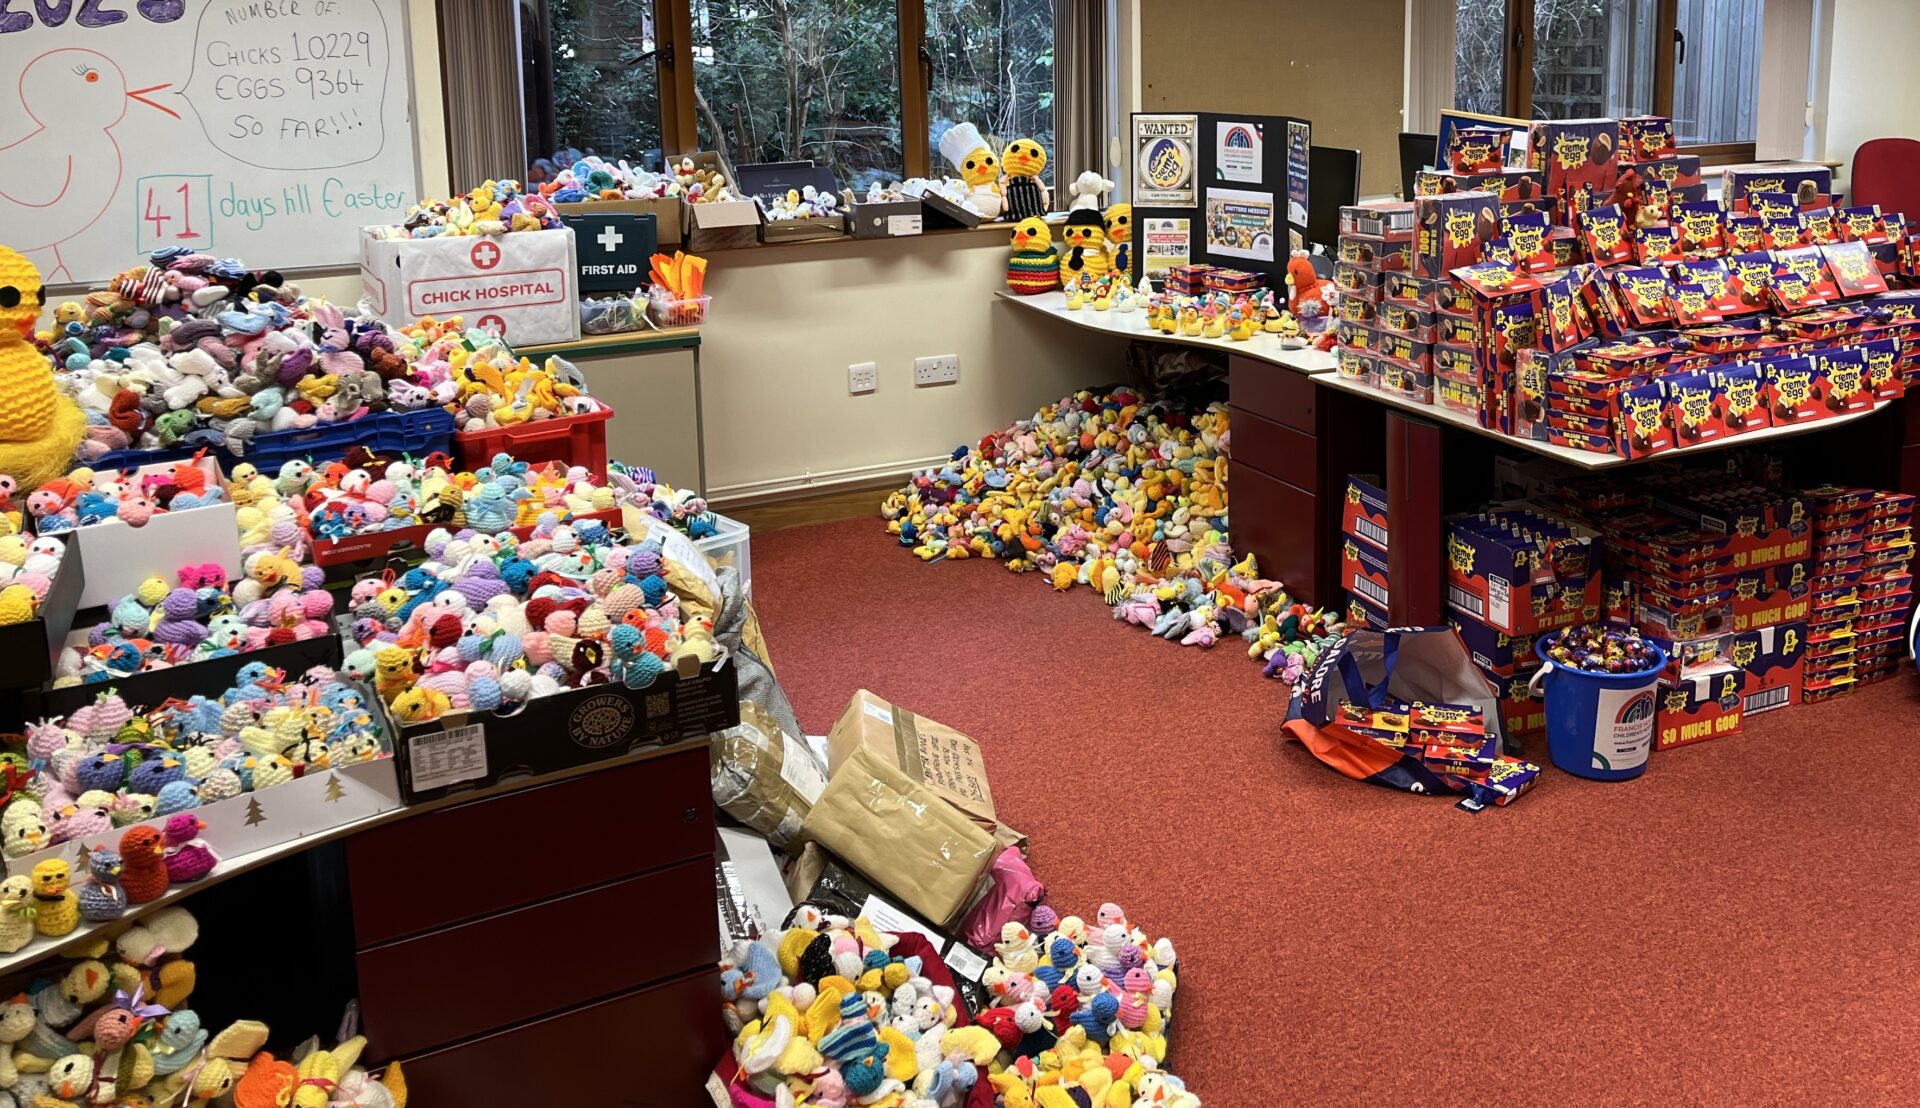 Office filled with knitted chicks and chocolate eggs